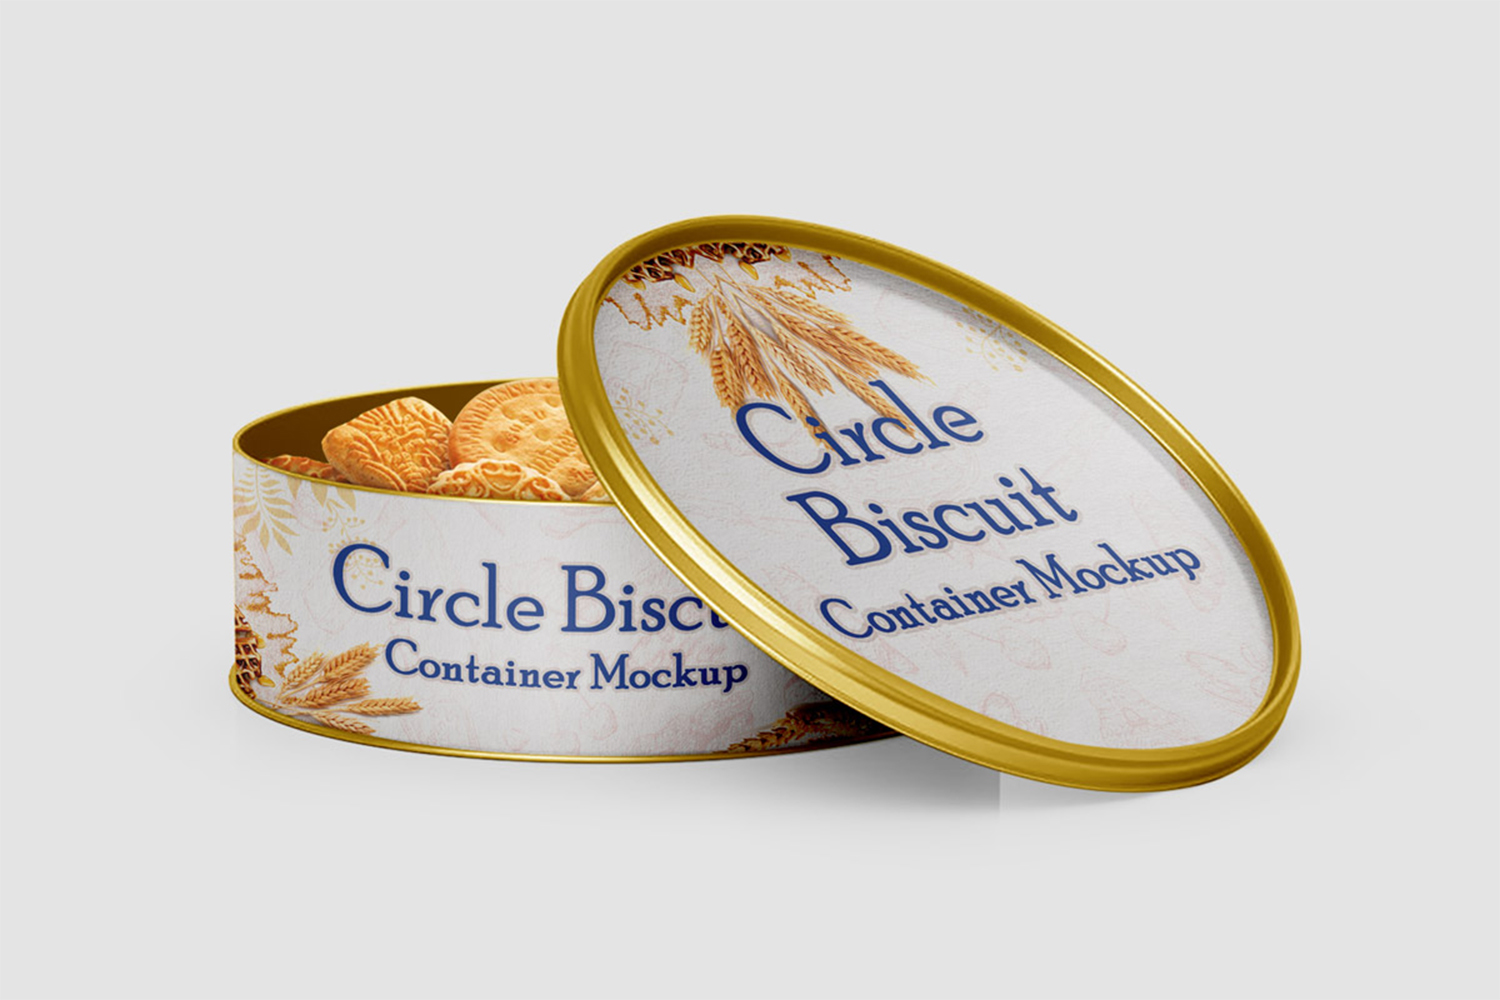 Circle Biscuit and Cookies Tin Container Mockup Free Download